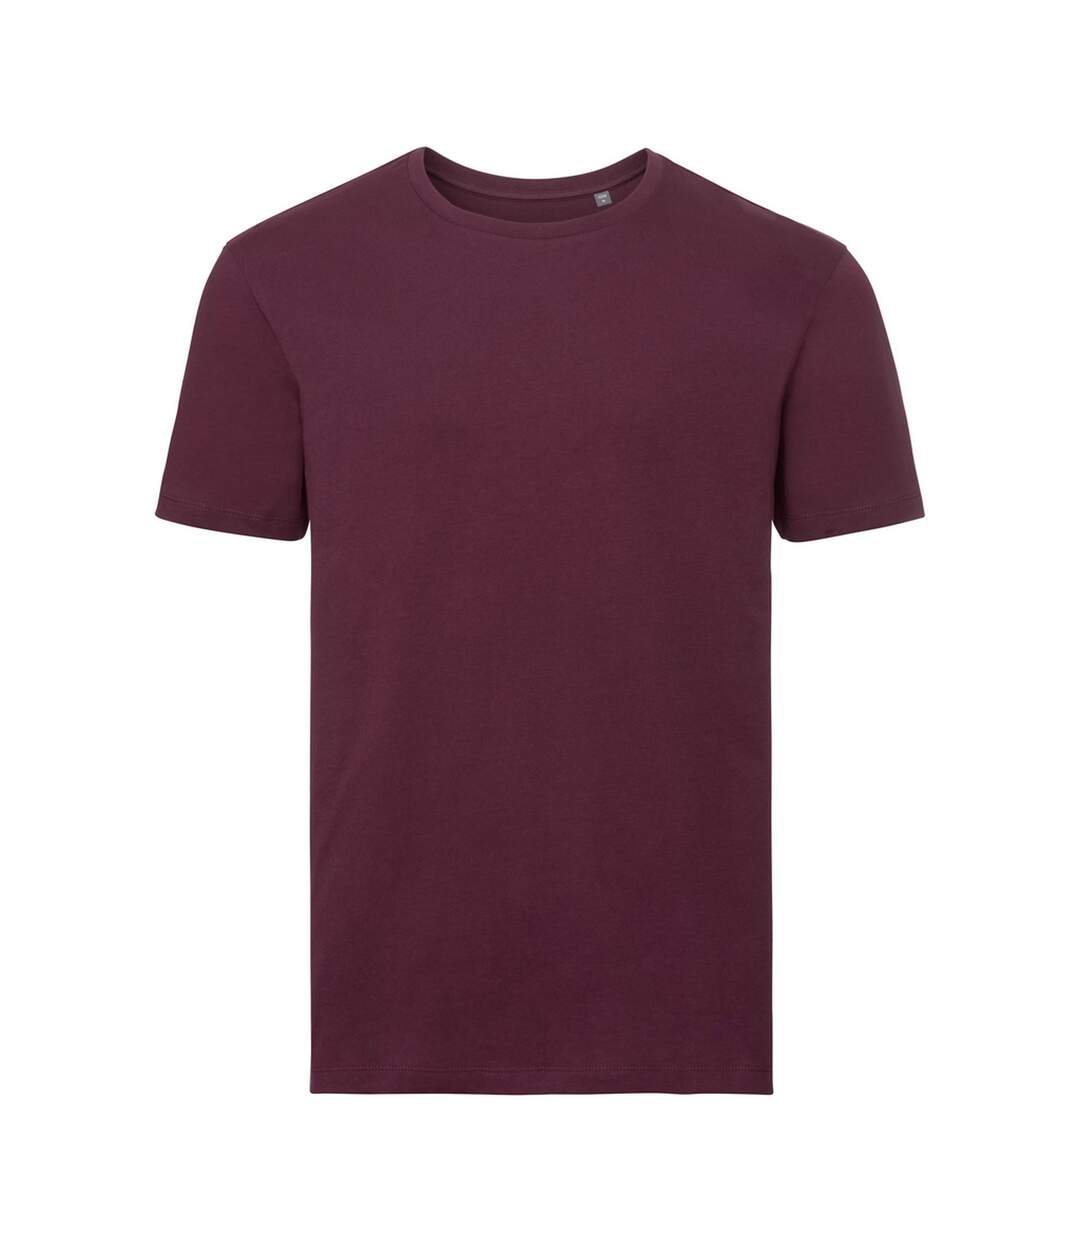 Russell Mens Authentic Pure Organic T-Shirt (Burgundy)